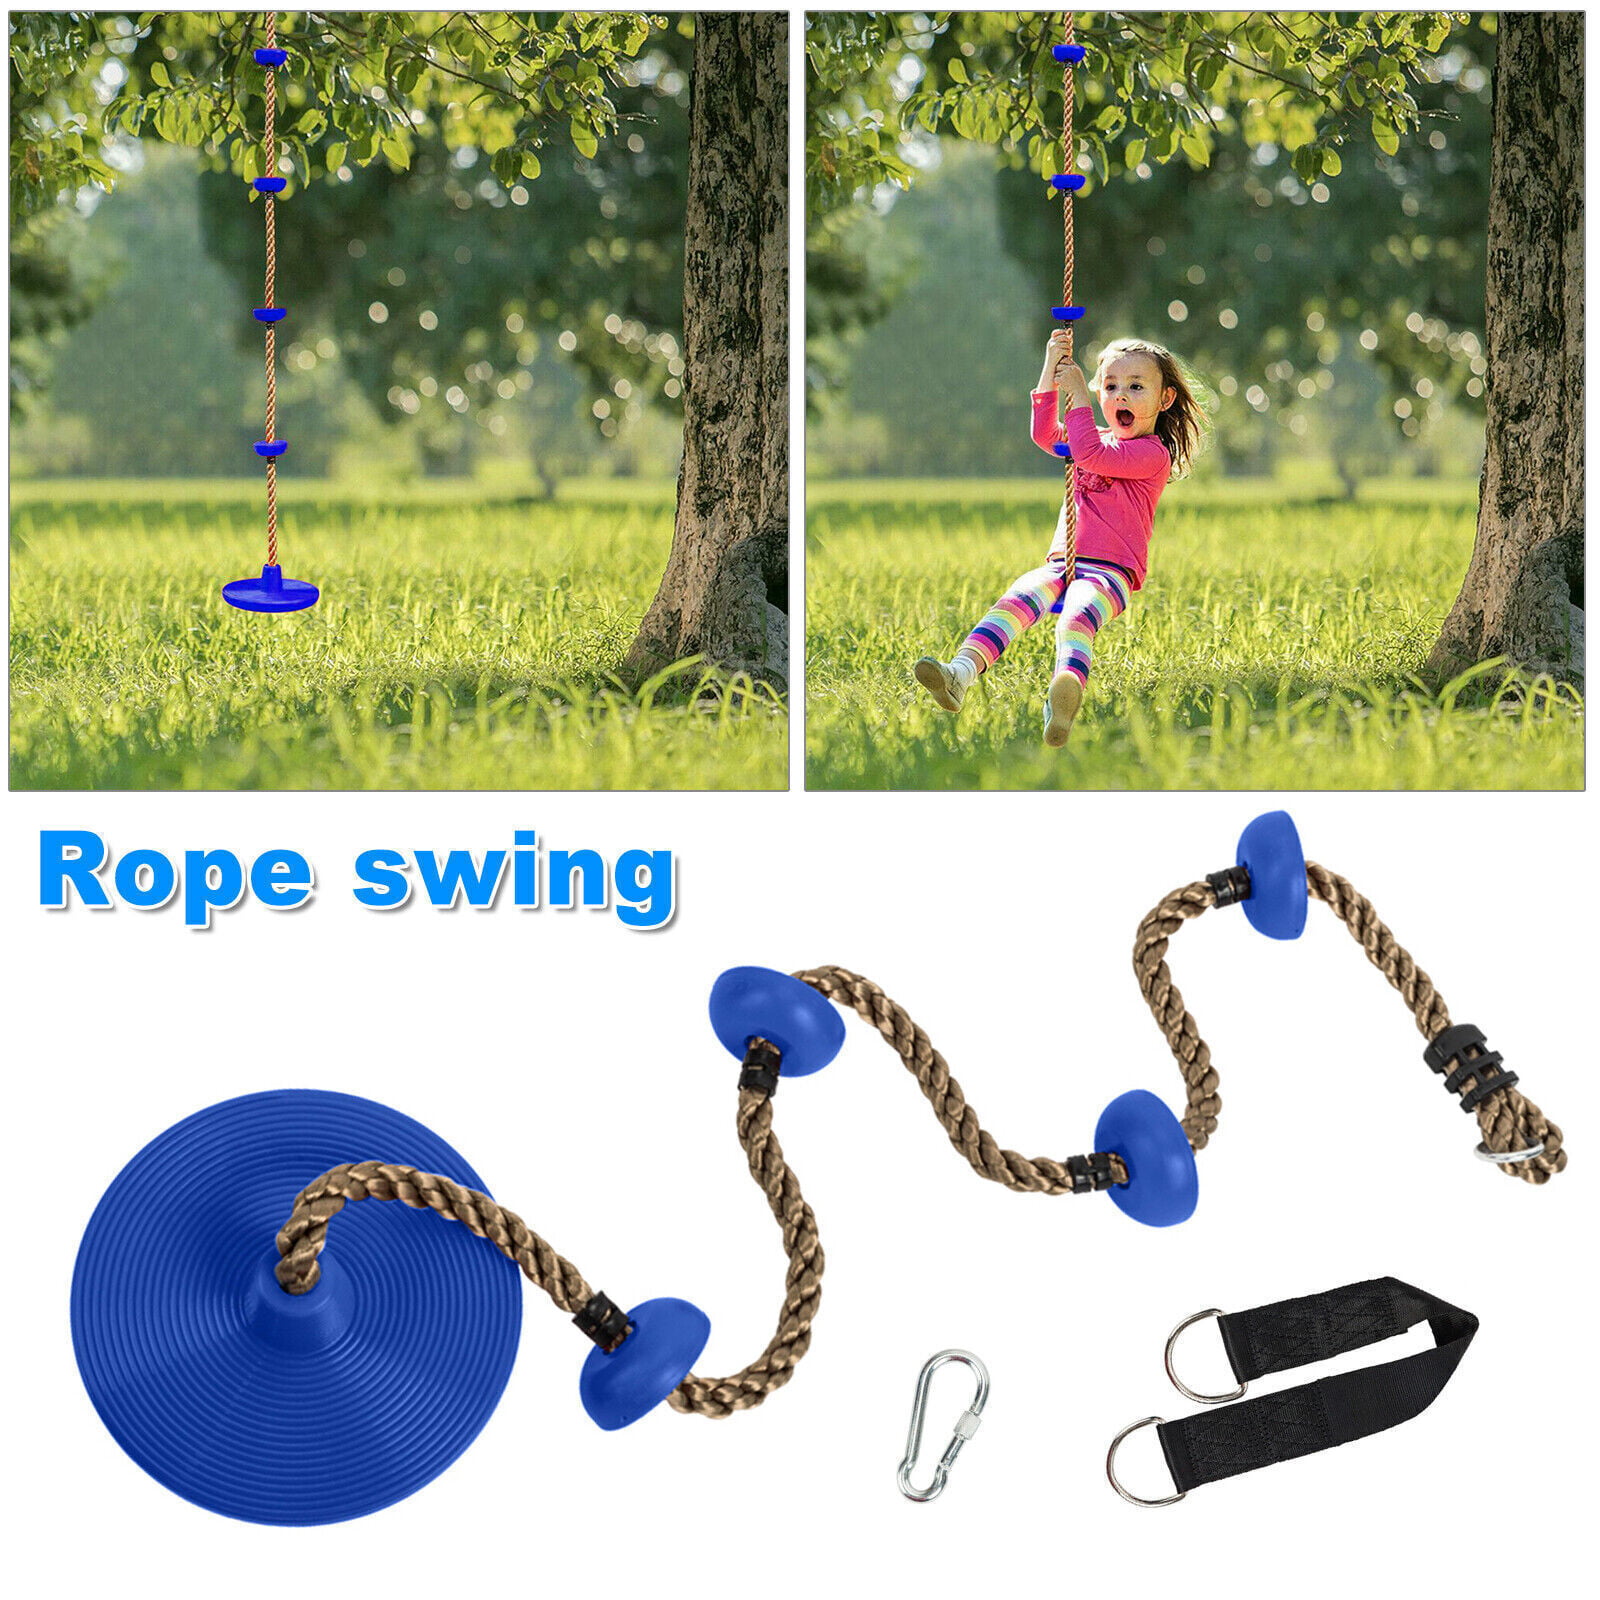 Clearance! Gym Kingdom Tree Swing for Kids - Single Disc Seat and Rainbow  Climbing Rope Set w/ Carabiner and 4 Foot Strap - Treehouse and Outdoor